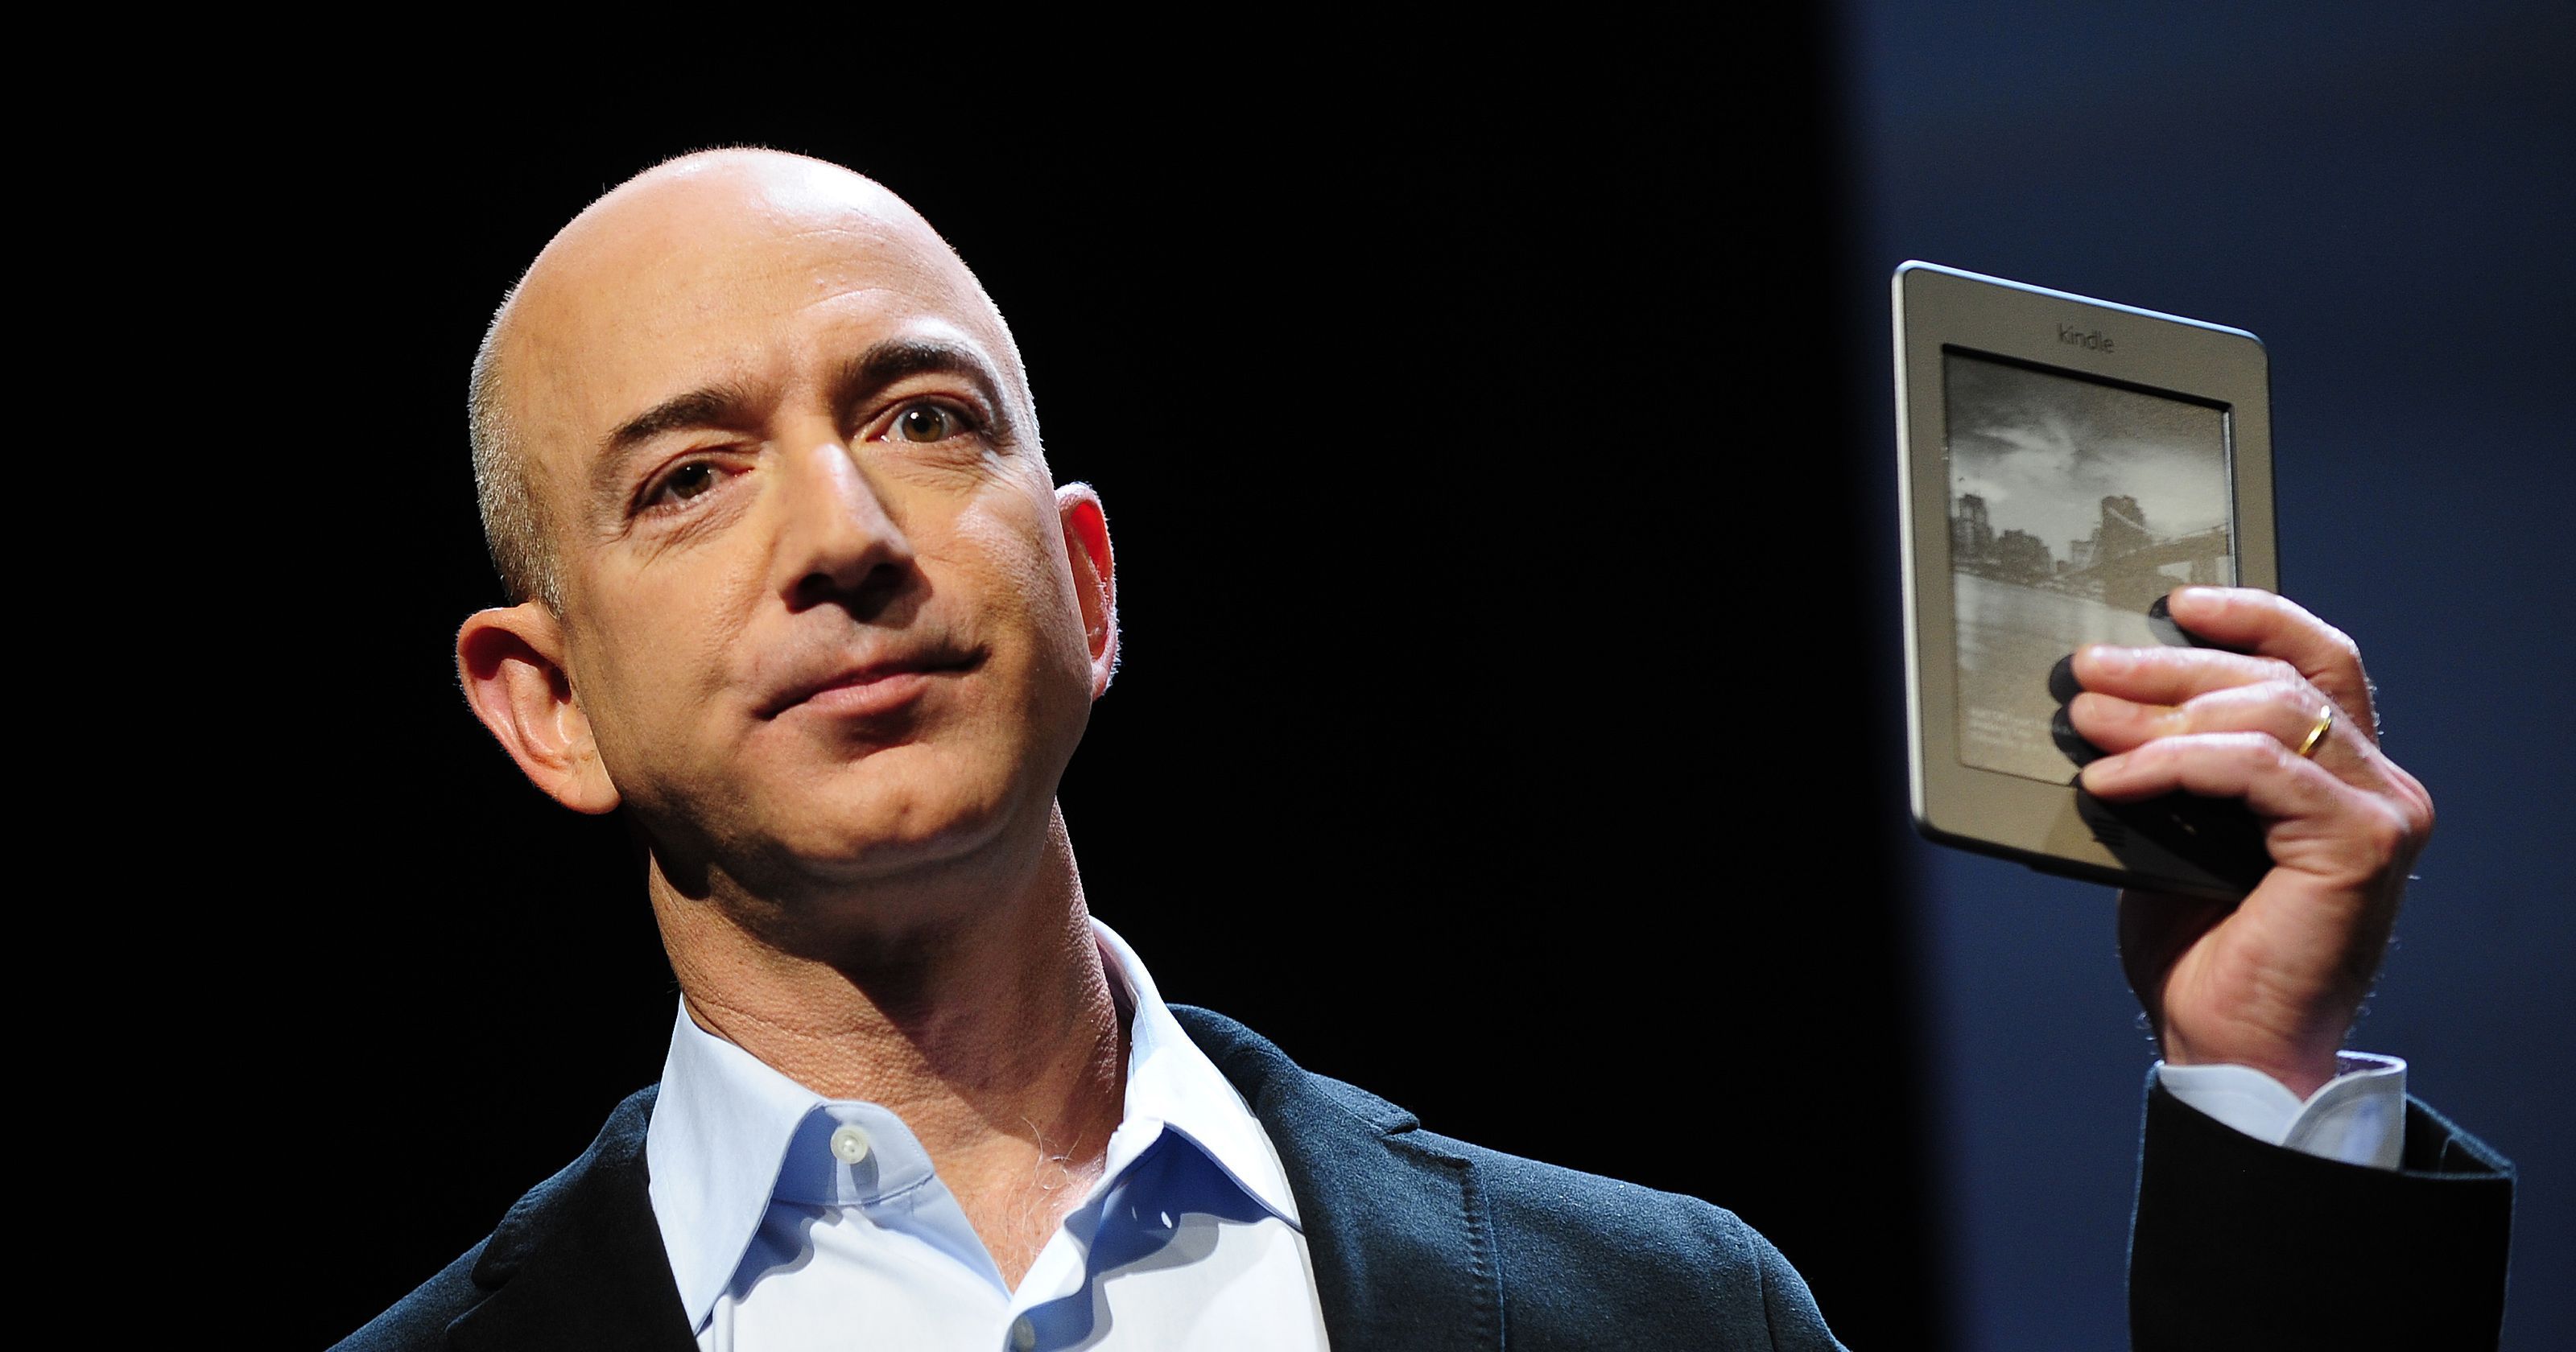 High Definition Wallpaper Of Jeff Bezos Presenting The Kindle